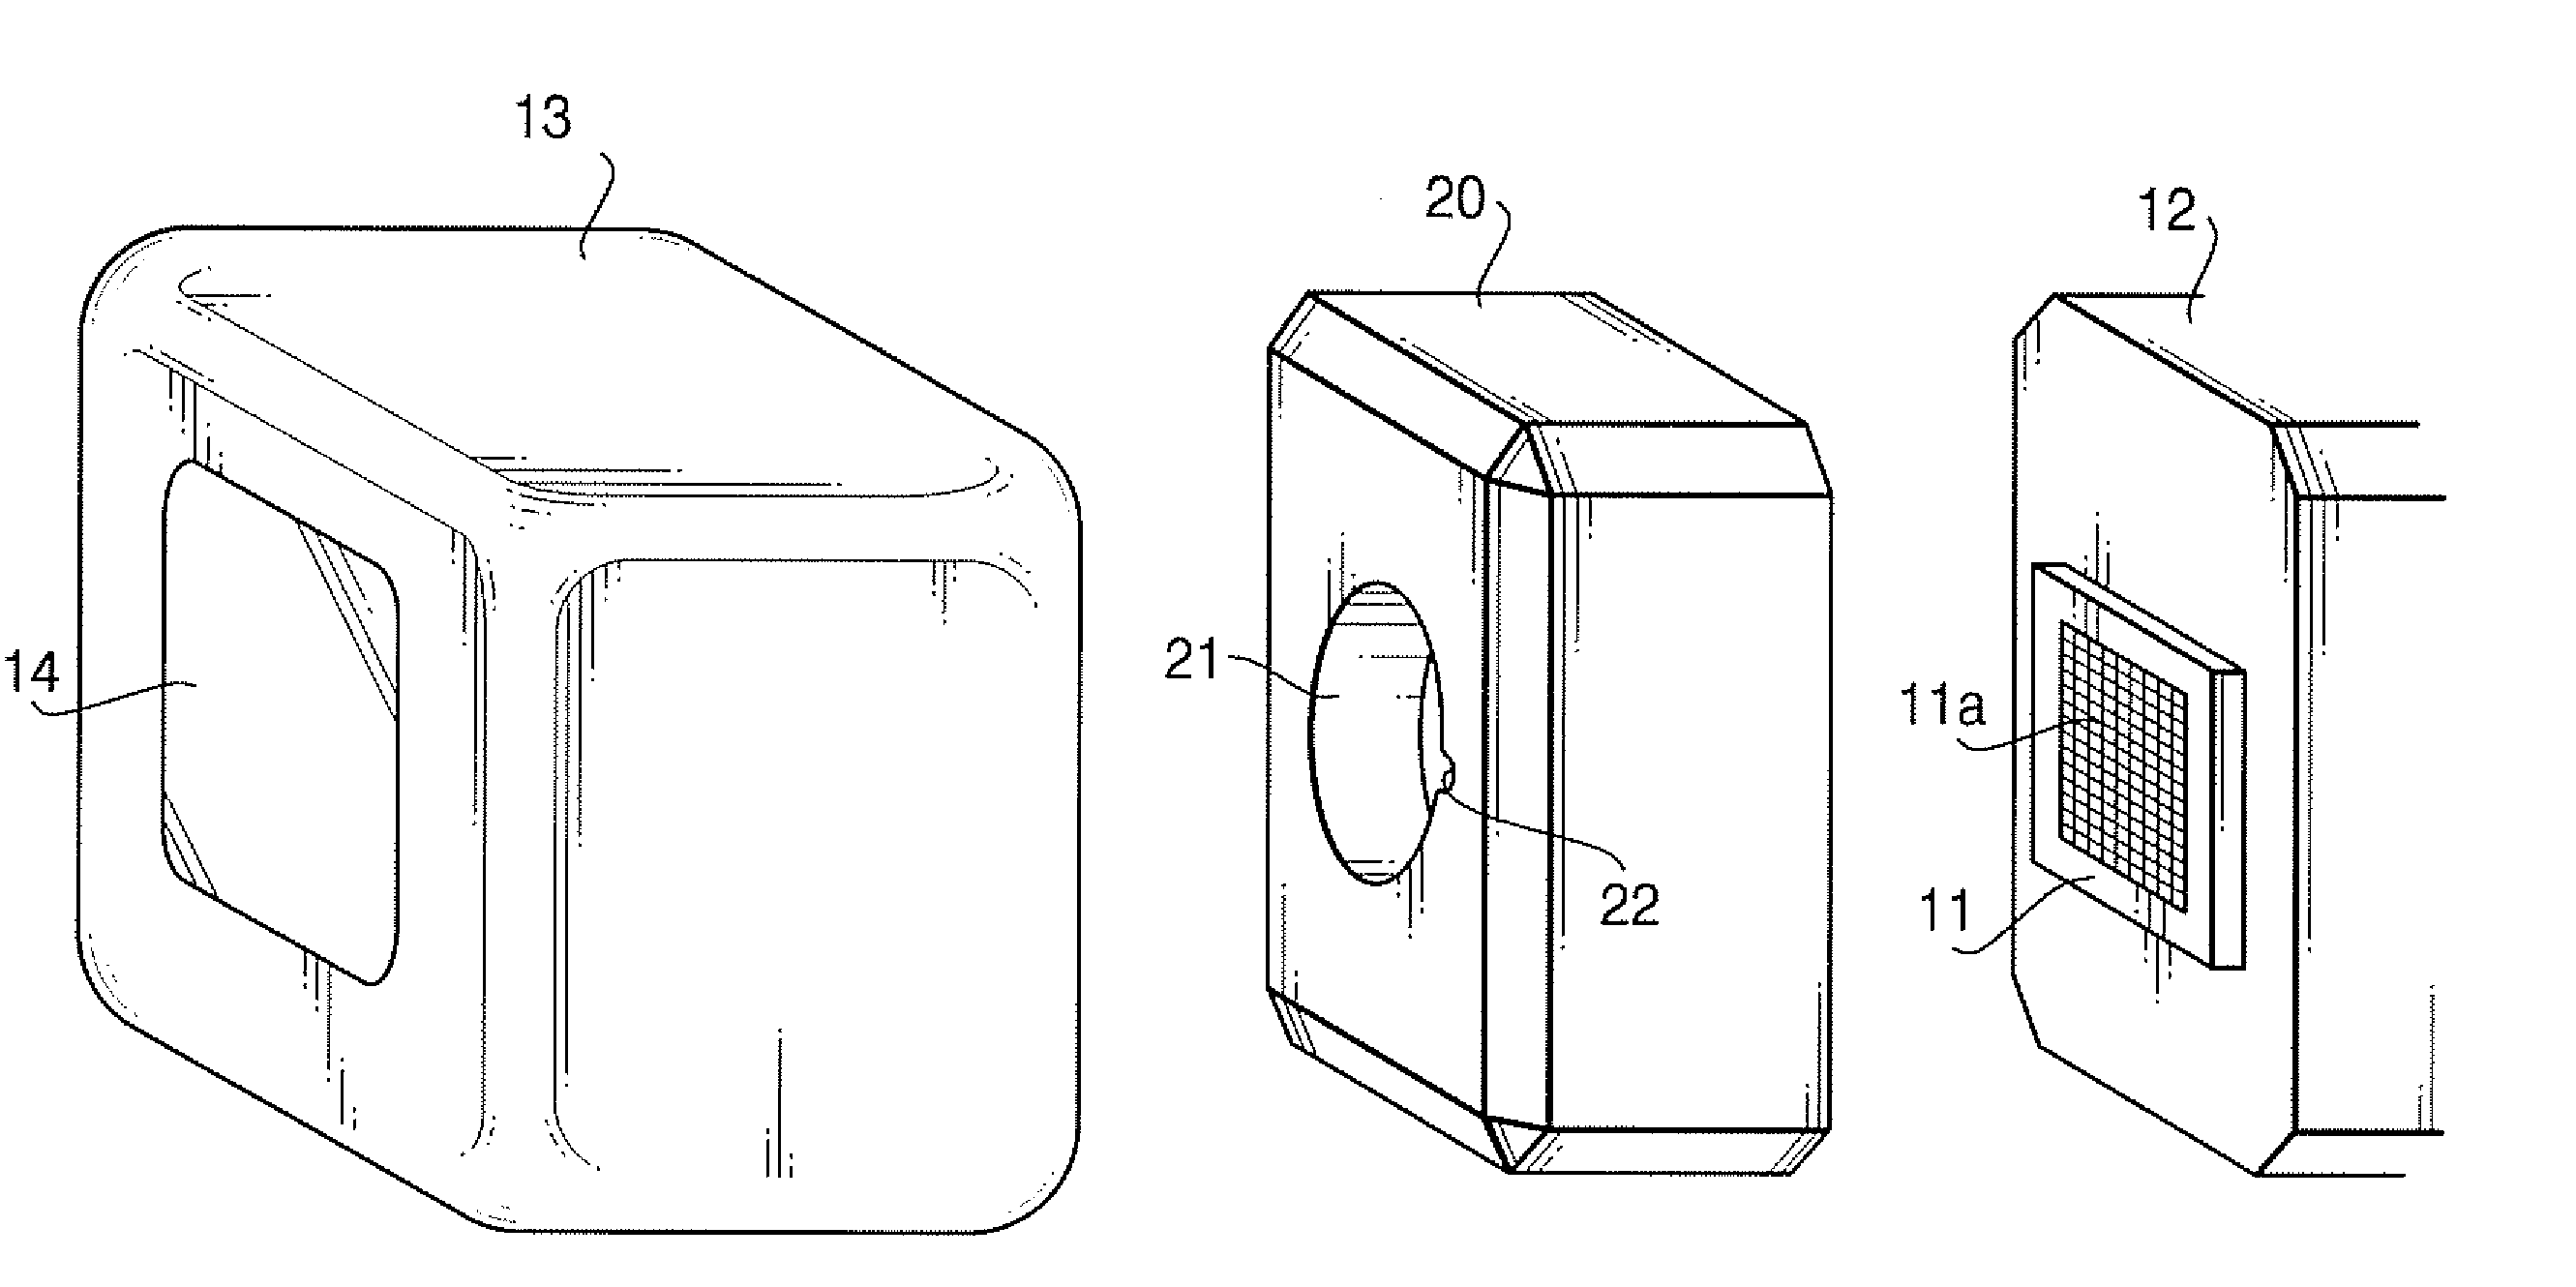 Image capturing element package for electronic endoscope